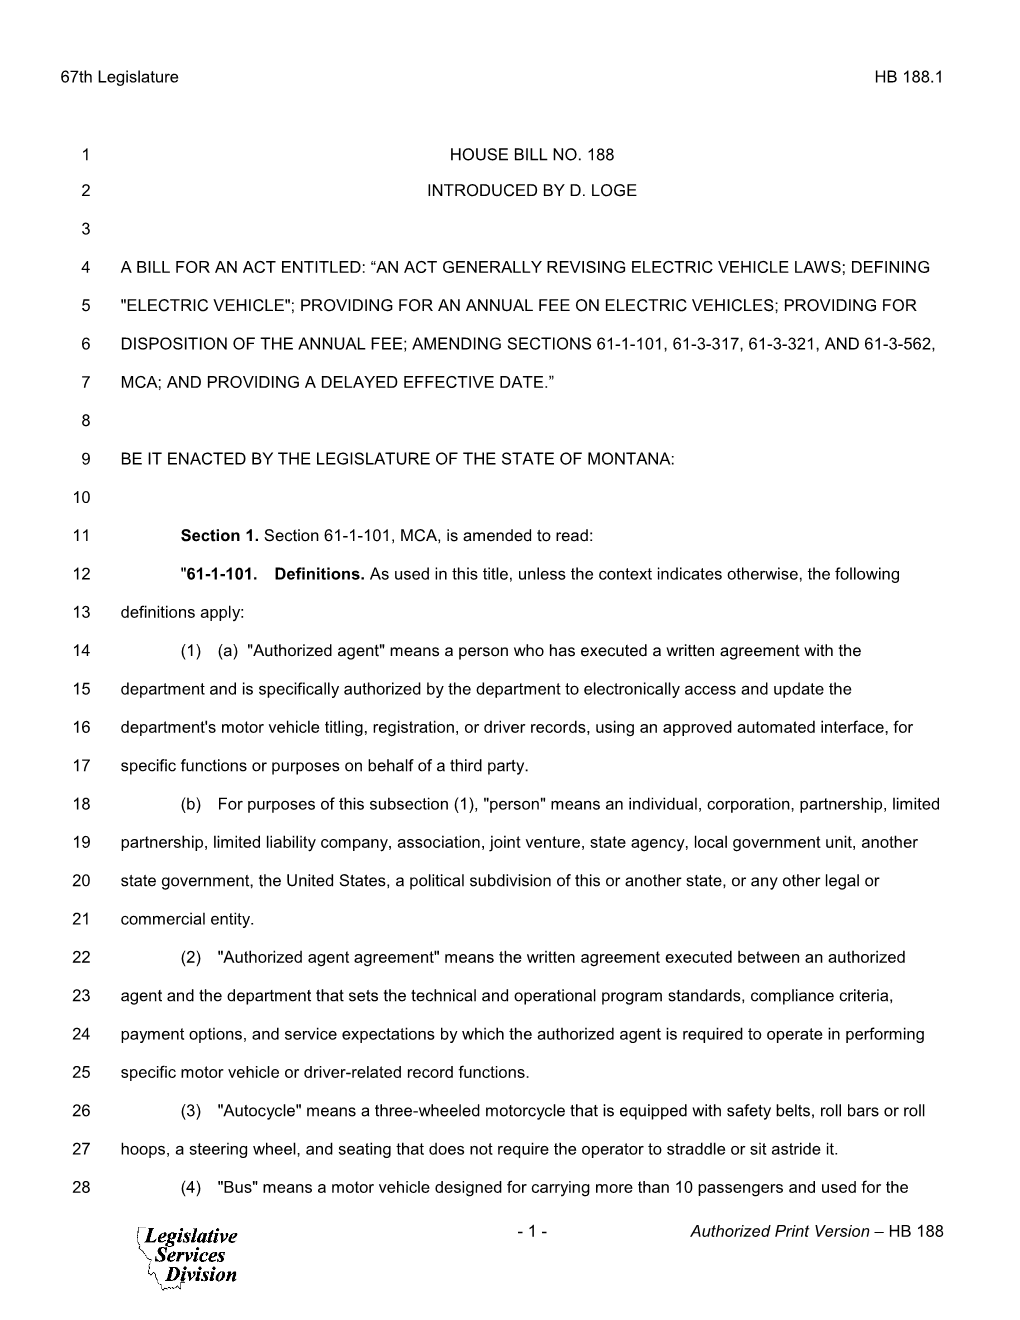 Hb 188 House Bill No. 188 1 Introduced by D. Loge 2 3 A